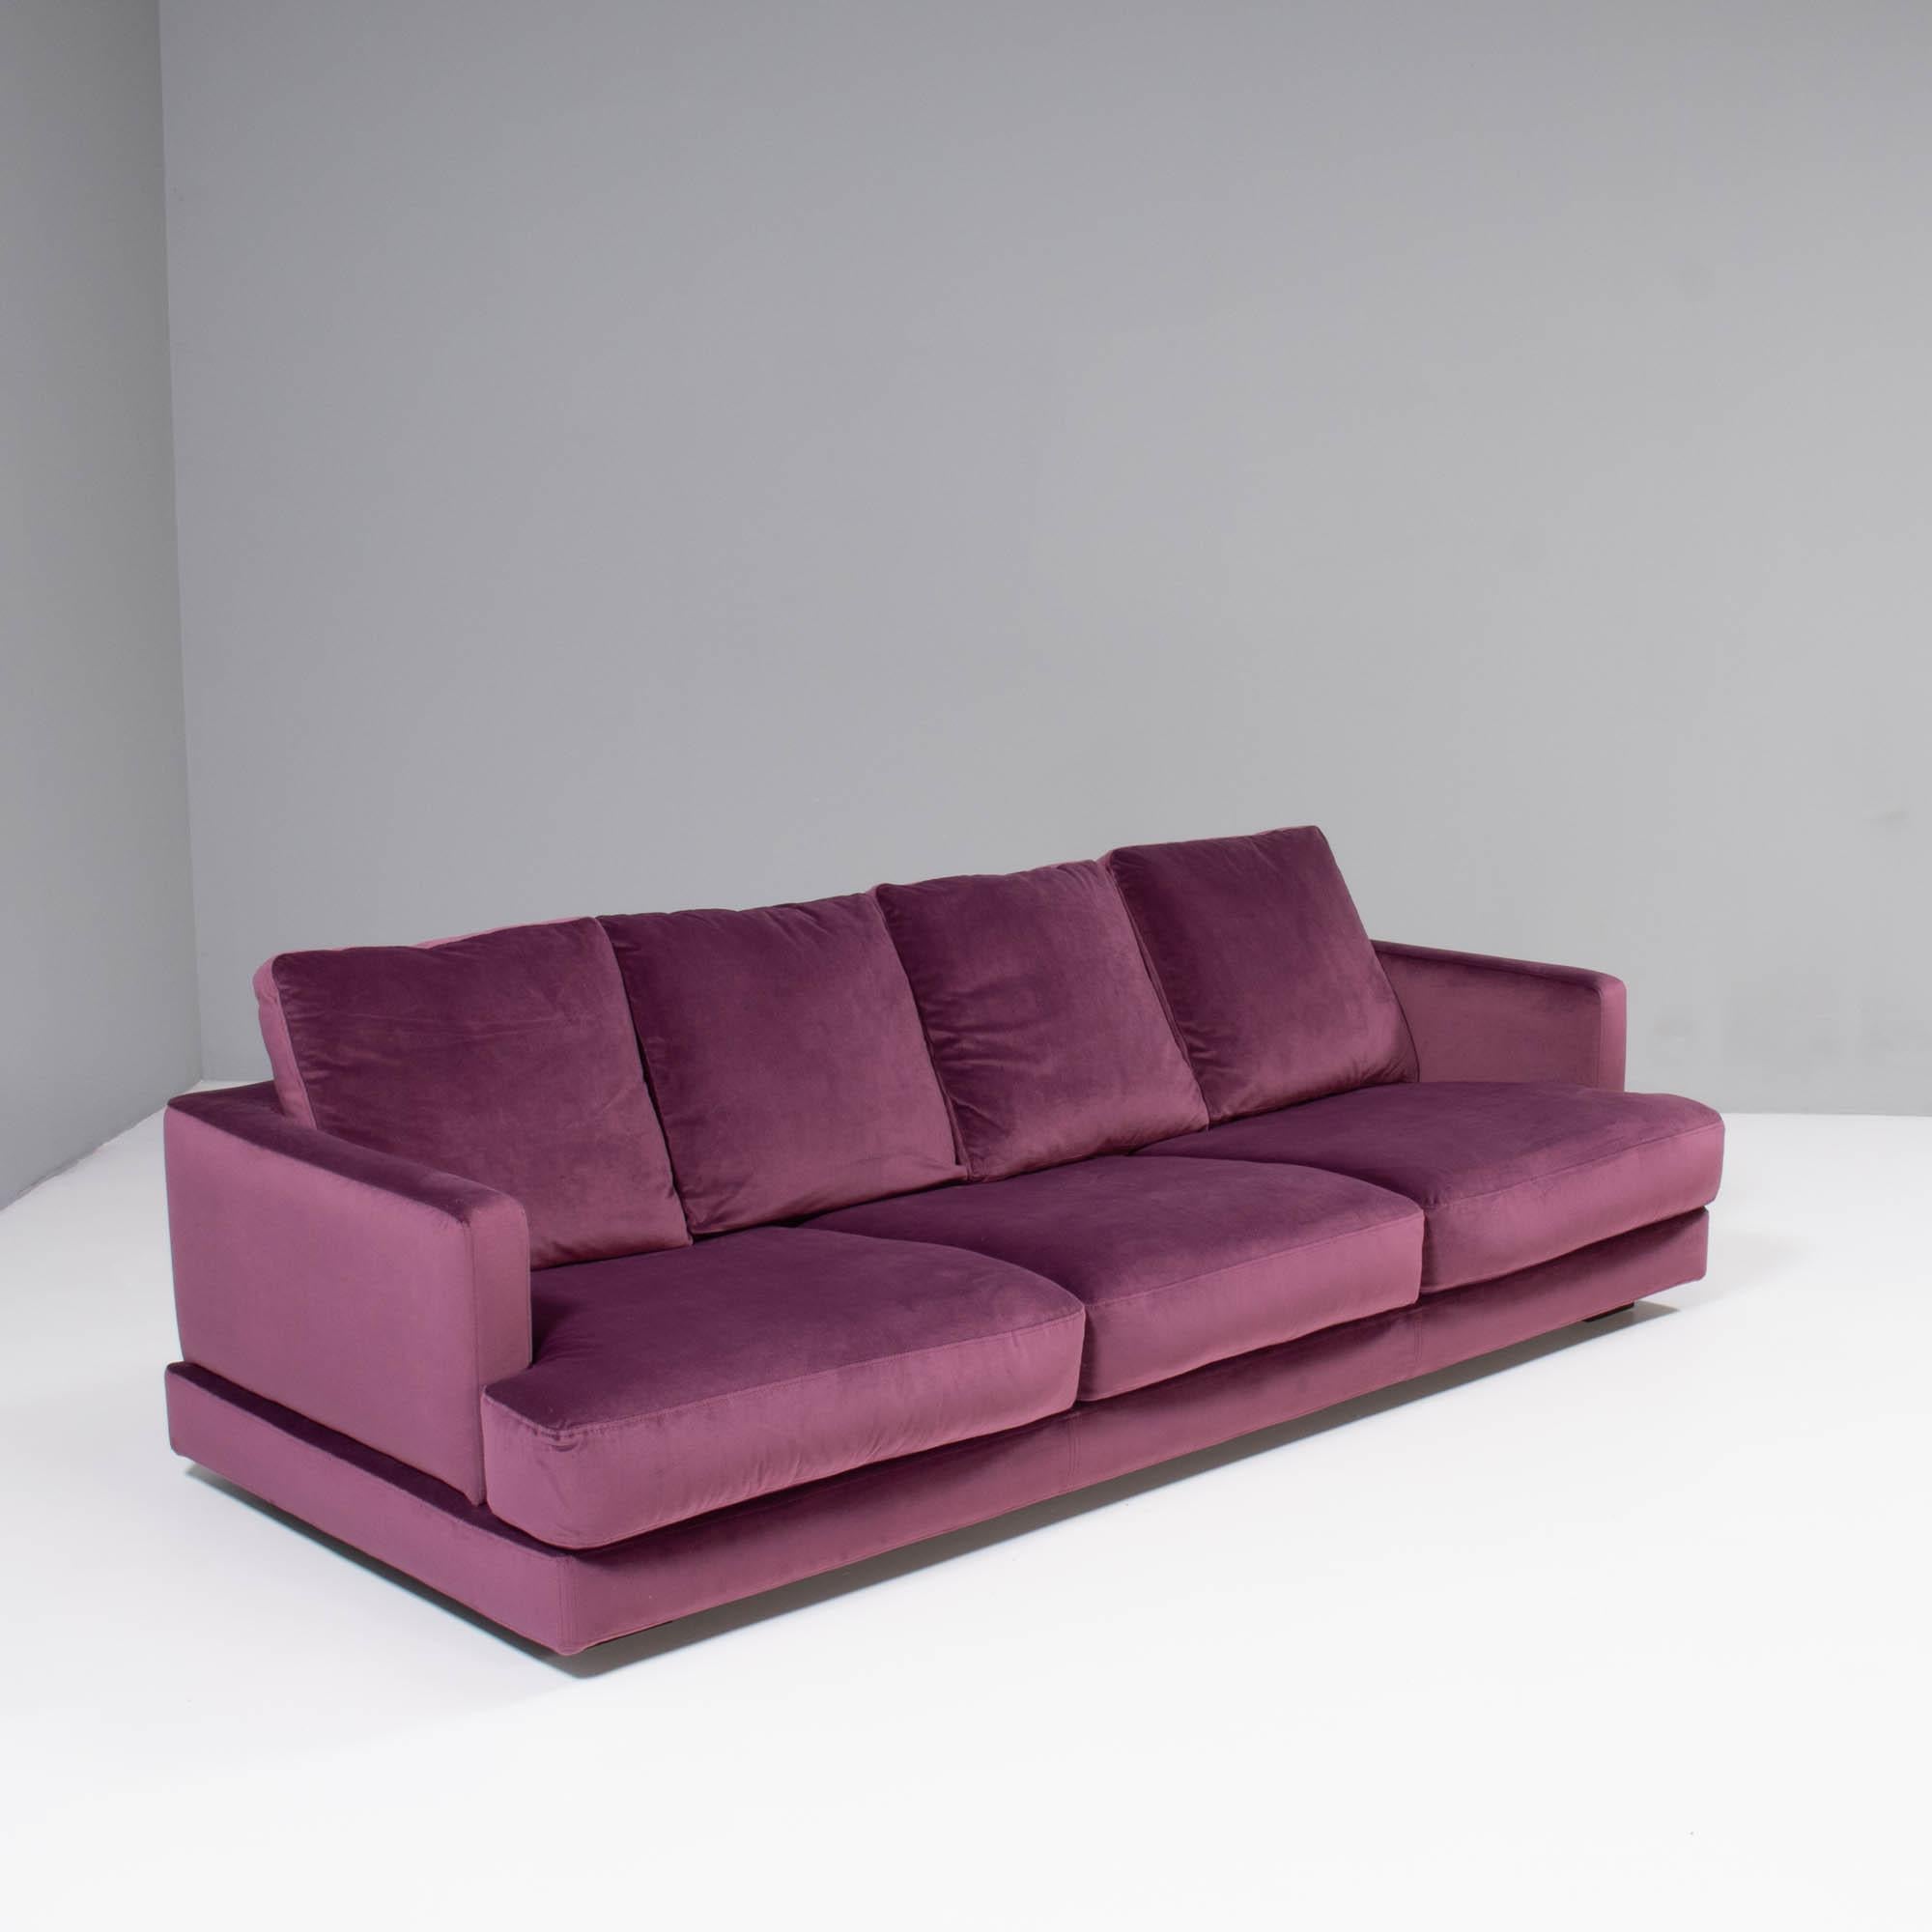 Designed by Roche Bobois, this Eclipse sofa is a timeless design.

The slimline frame sits on wooden block feet, giving the illusion that the sofa is floating above the floor.

Newly upholstered in deep purple velvet fabric, the sofa features